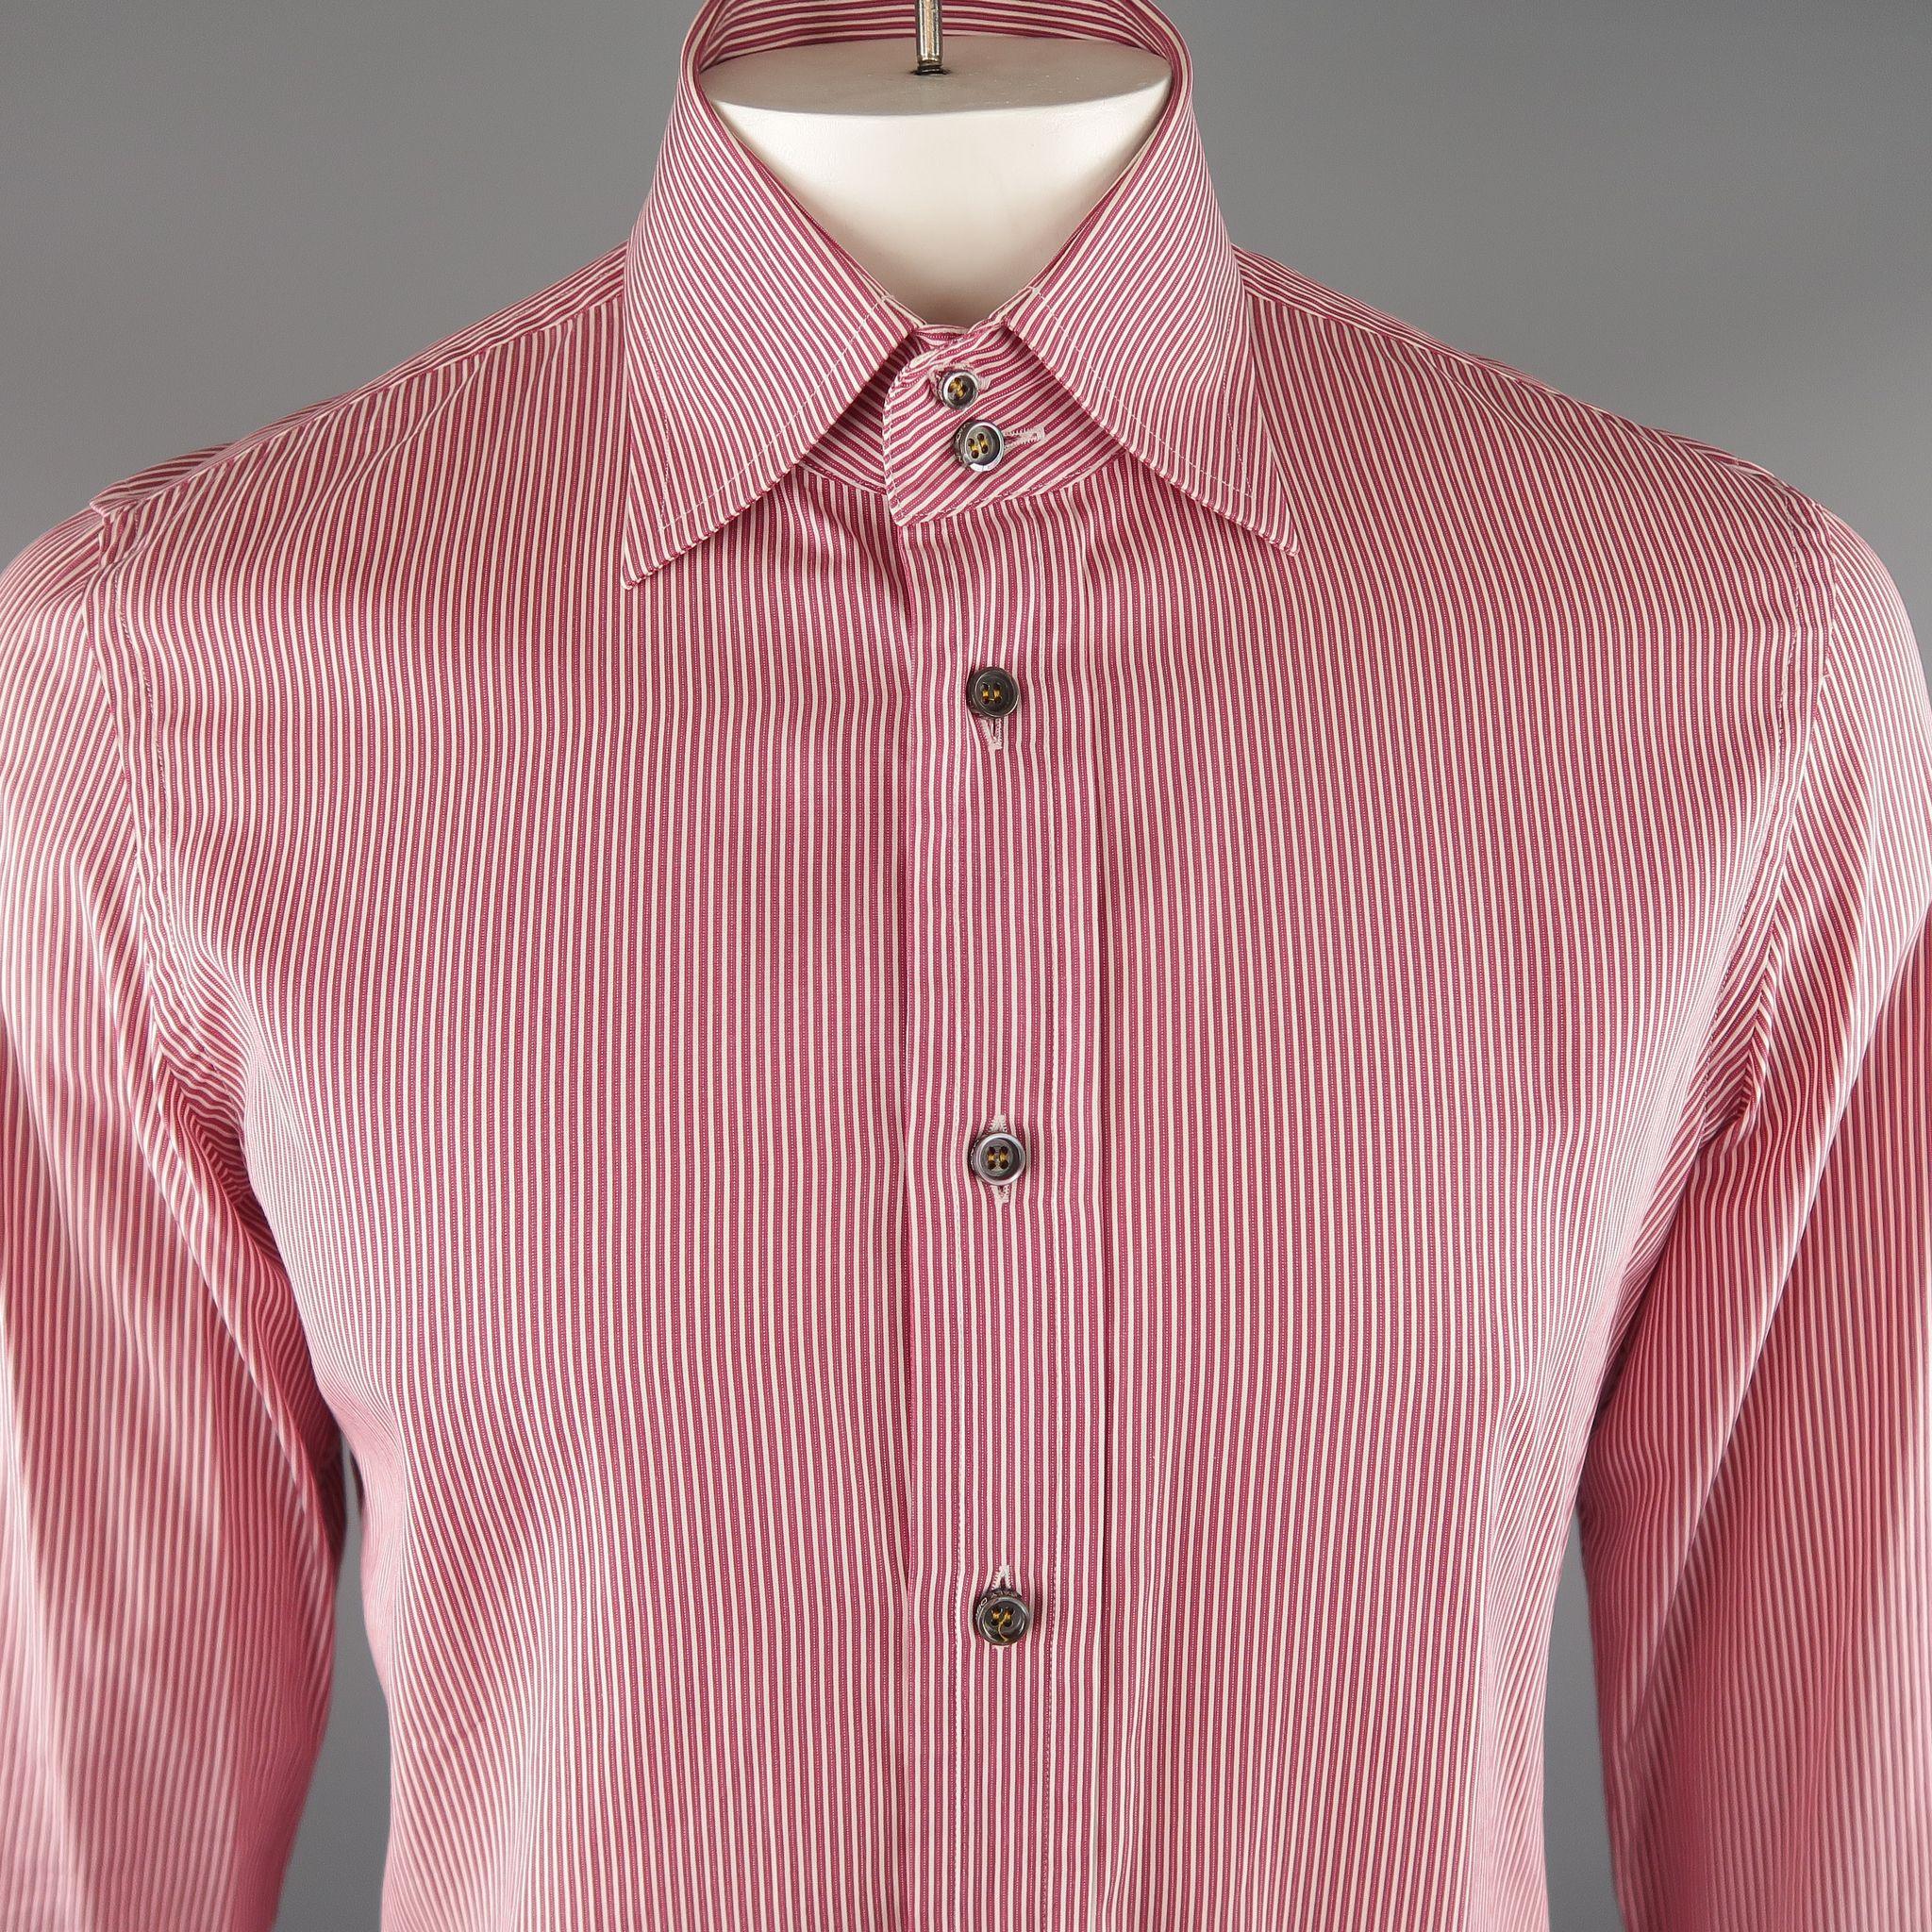 DSQUARED2 Long Sleeve Shirt comes in red and white tones, in a pinstripe cotton material, with a double closure at the spread collar, button up and with a wide cuff. Minor wear, one of the buttons at left cuff is partially broken. Made in Italy.
